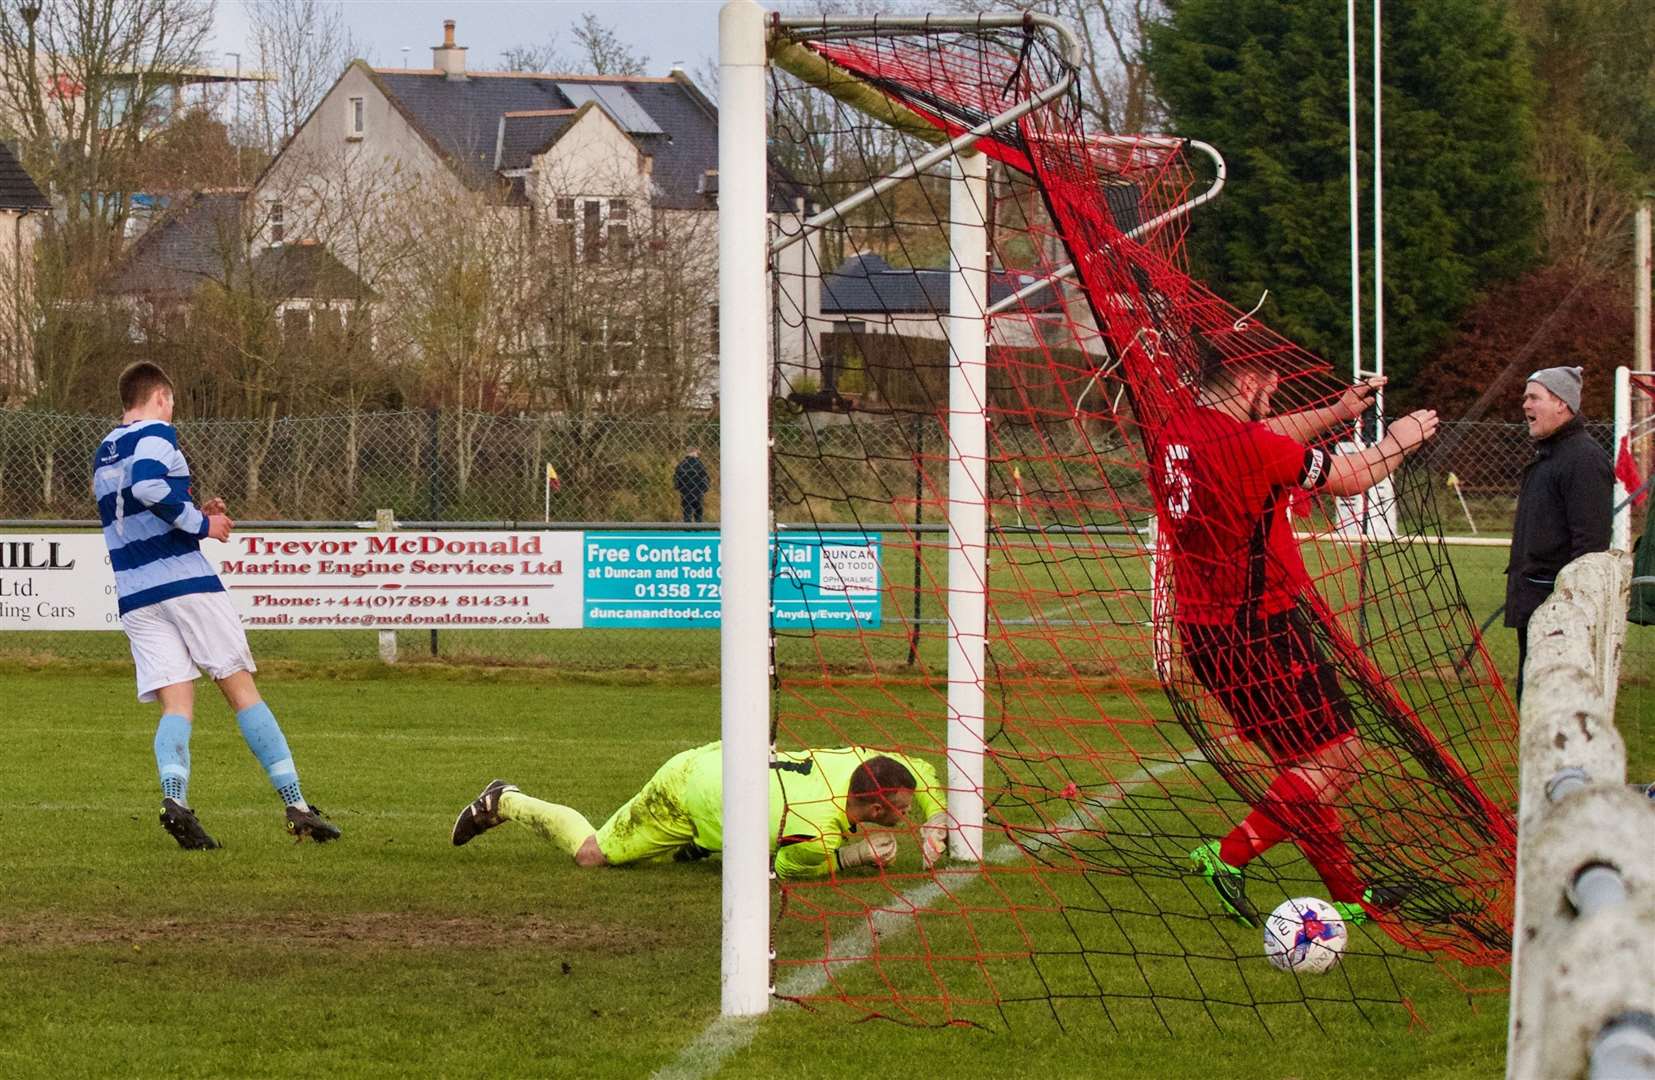 Banks O'Dee won 3-0 at the Meadows in the Grill League Cup semi-final last weekend. Picture: Phil Harman